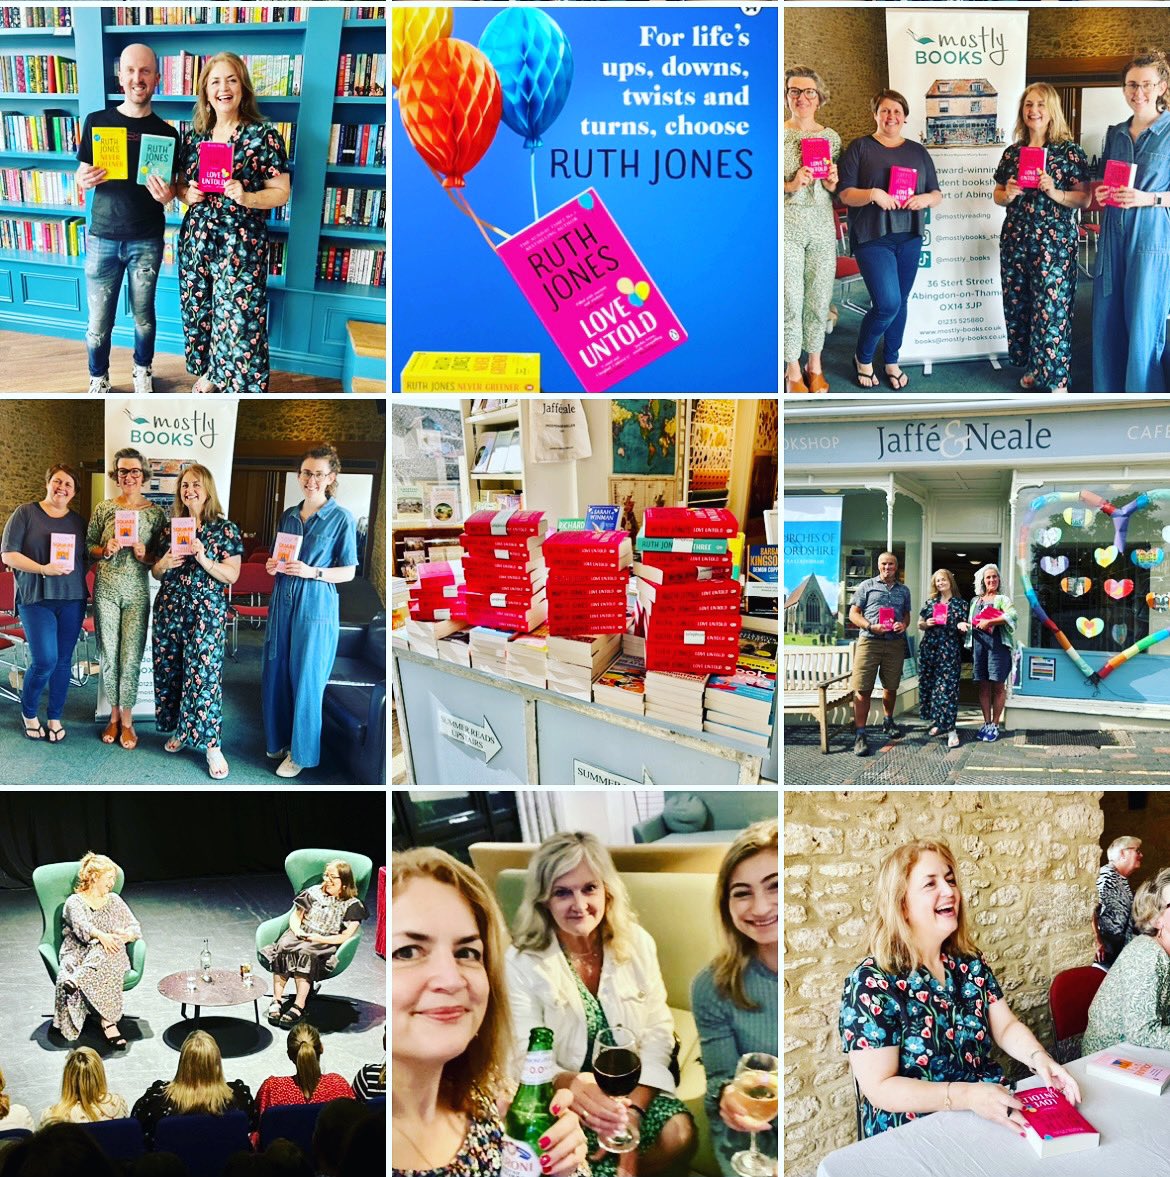 This is how we book tour. 💥 🎉📚🎈 A wonderful day of meeting readers new and established, greeting booksellers, visiting bookshops, spending it all the while with the fabulous Ruth Jones to celebrate PB publication of #LoveUntold #LoveRuth 🎈📚🎉💥